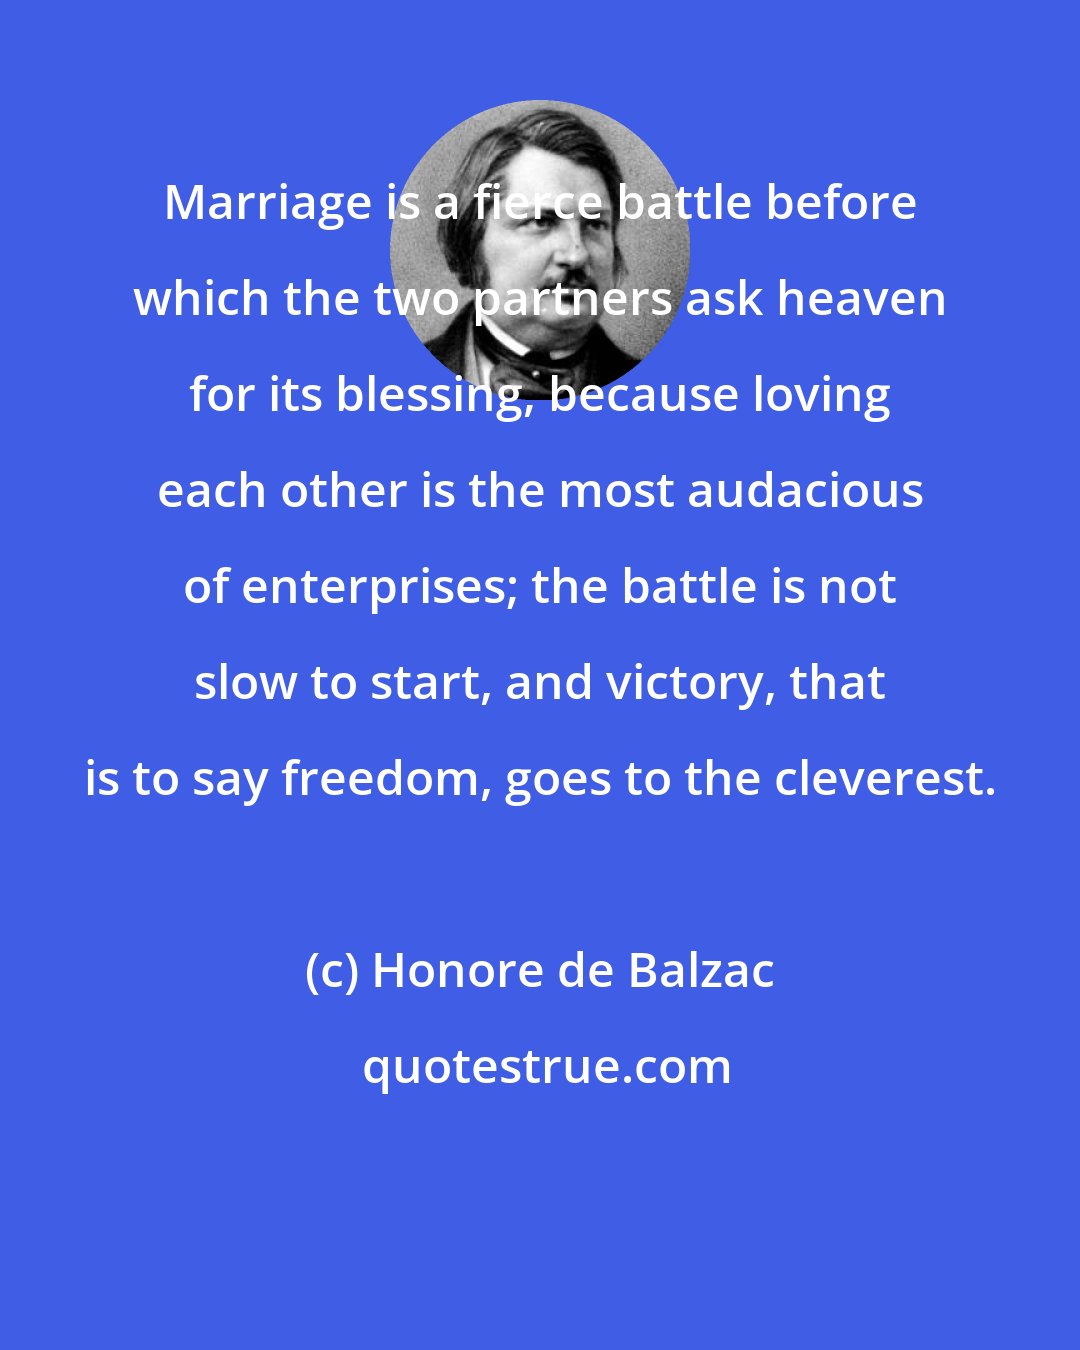 Honore de Balzac: Marriage is a fierce battle before which the two partners ask heaven for its blessing, because loving each other is the most audacious of enterprises; the battle is not slow to start, and victory, that is to say freedom, goes to the cleverest.